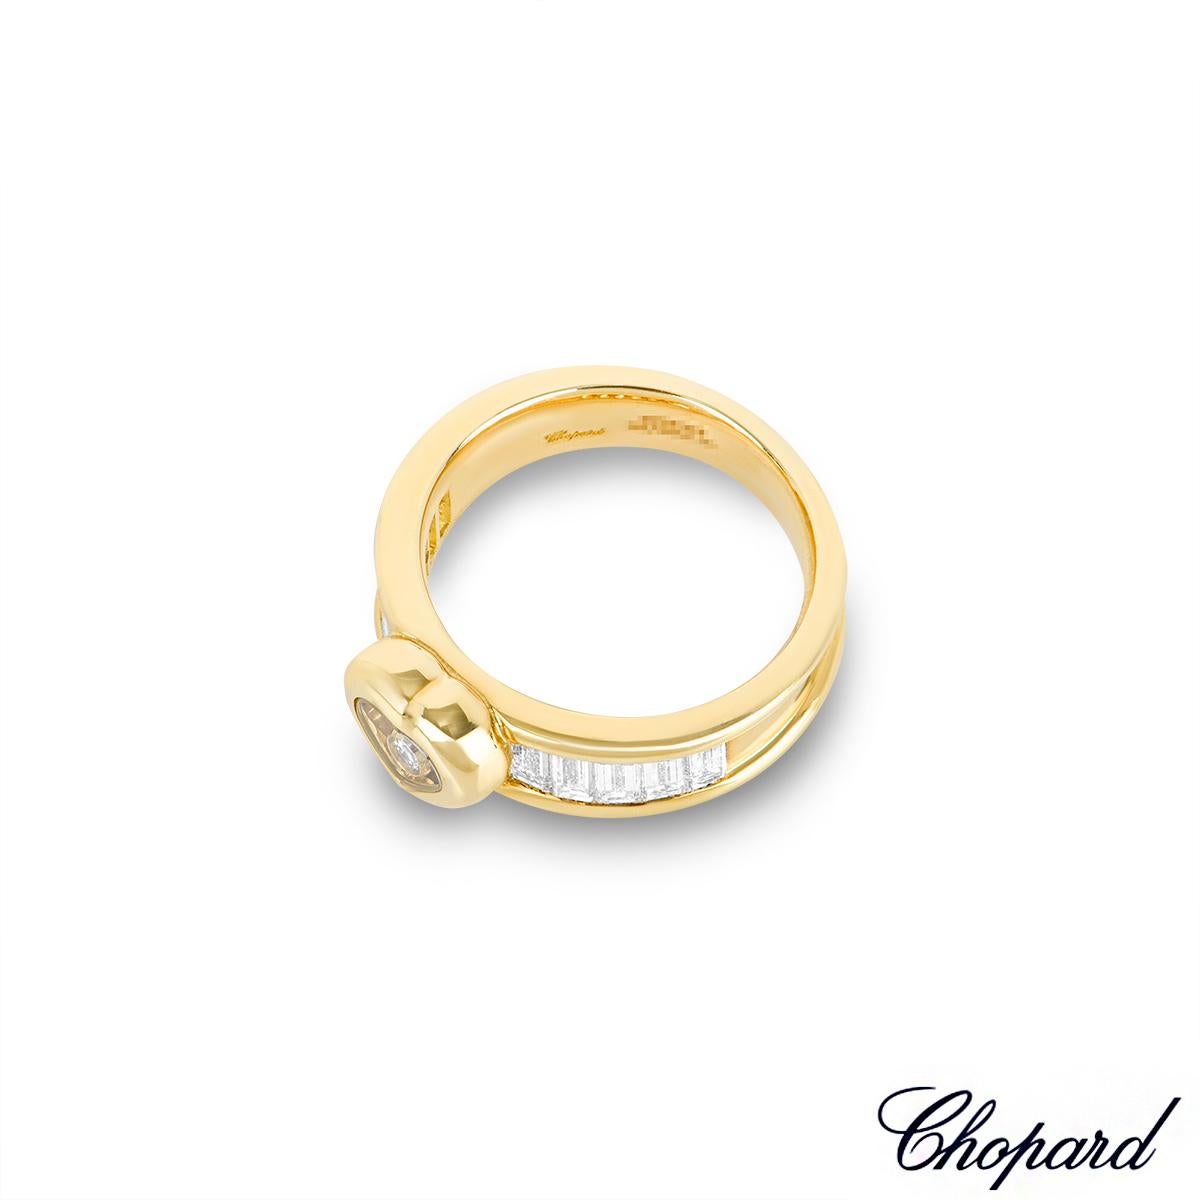 Chopard Yellow Gold Happy Diamonds Ring 82/2853-0111 In New Condition For Sale In London, GB